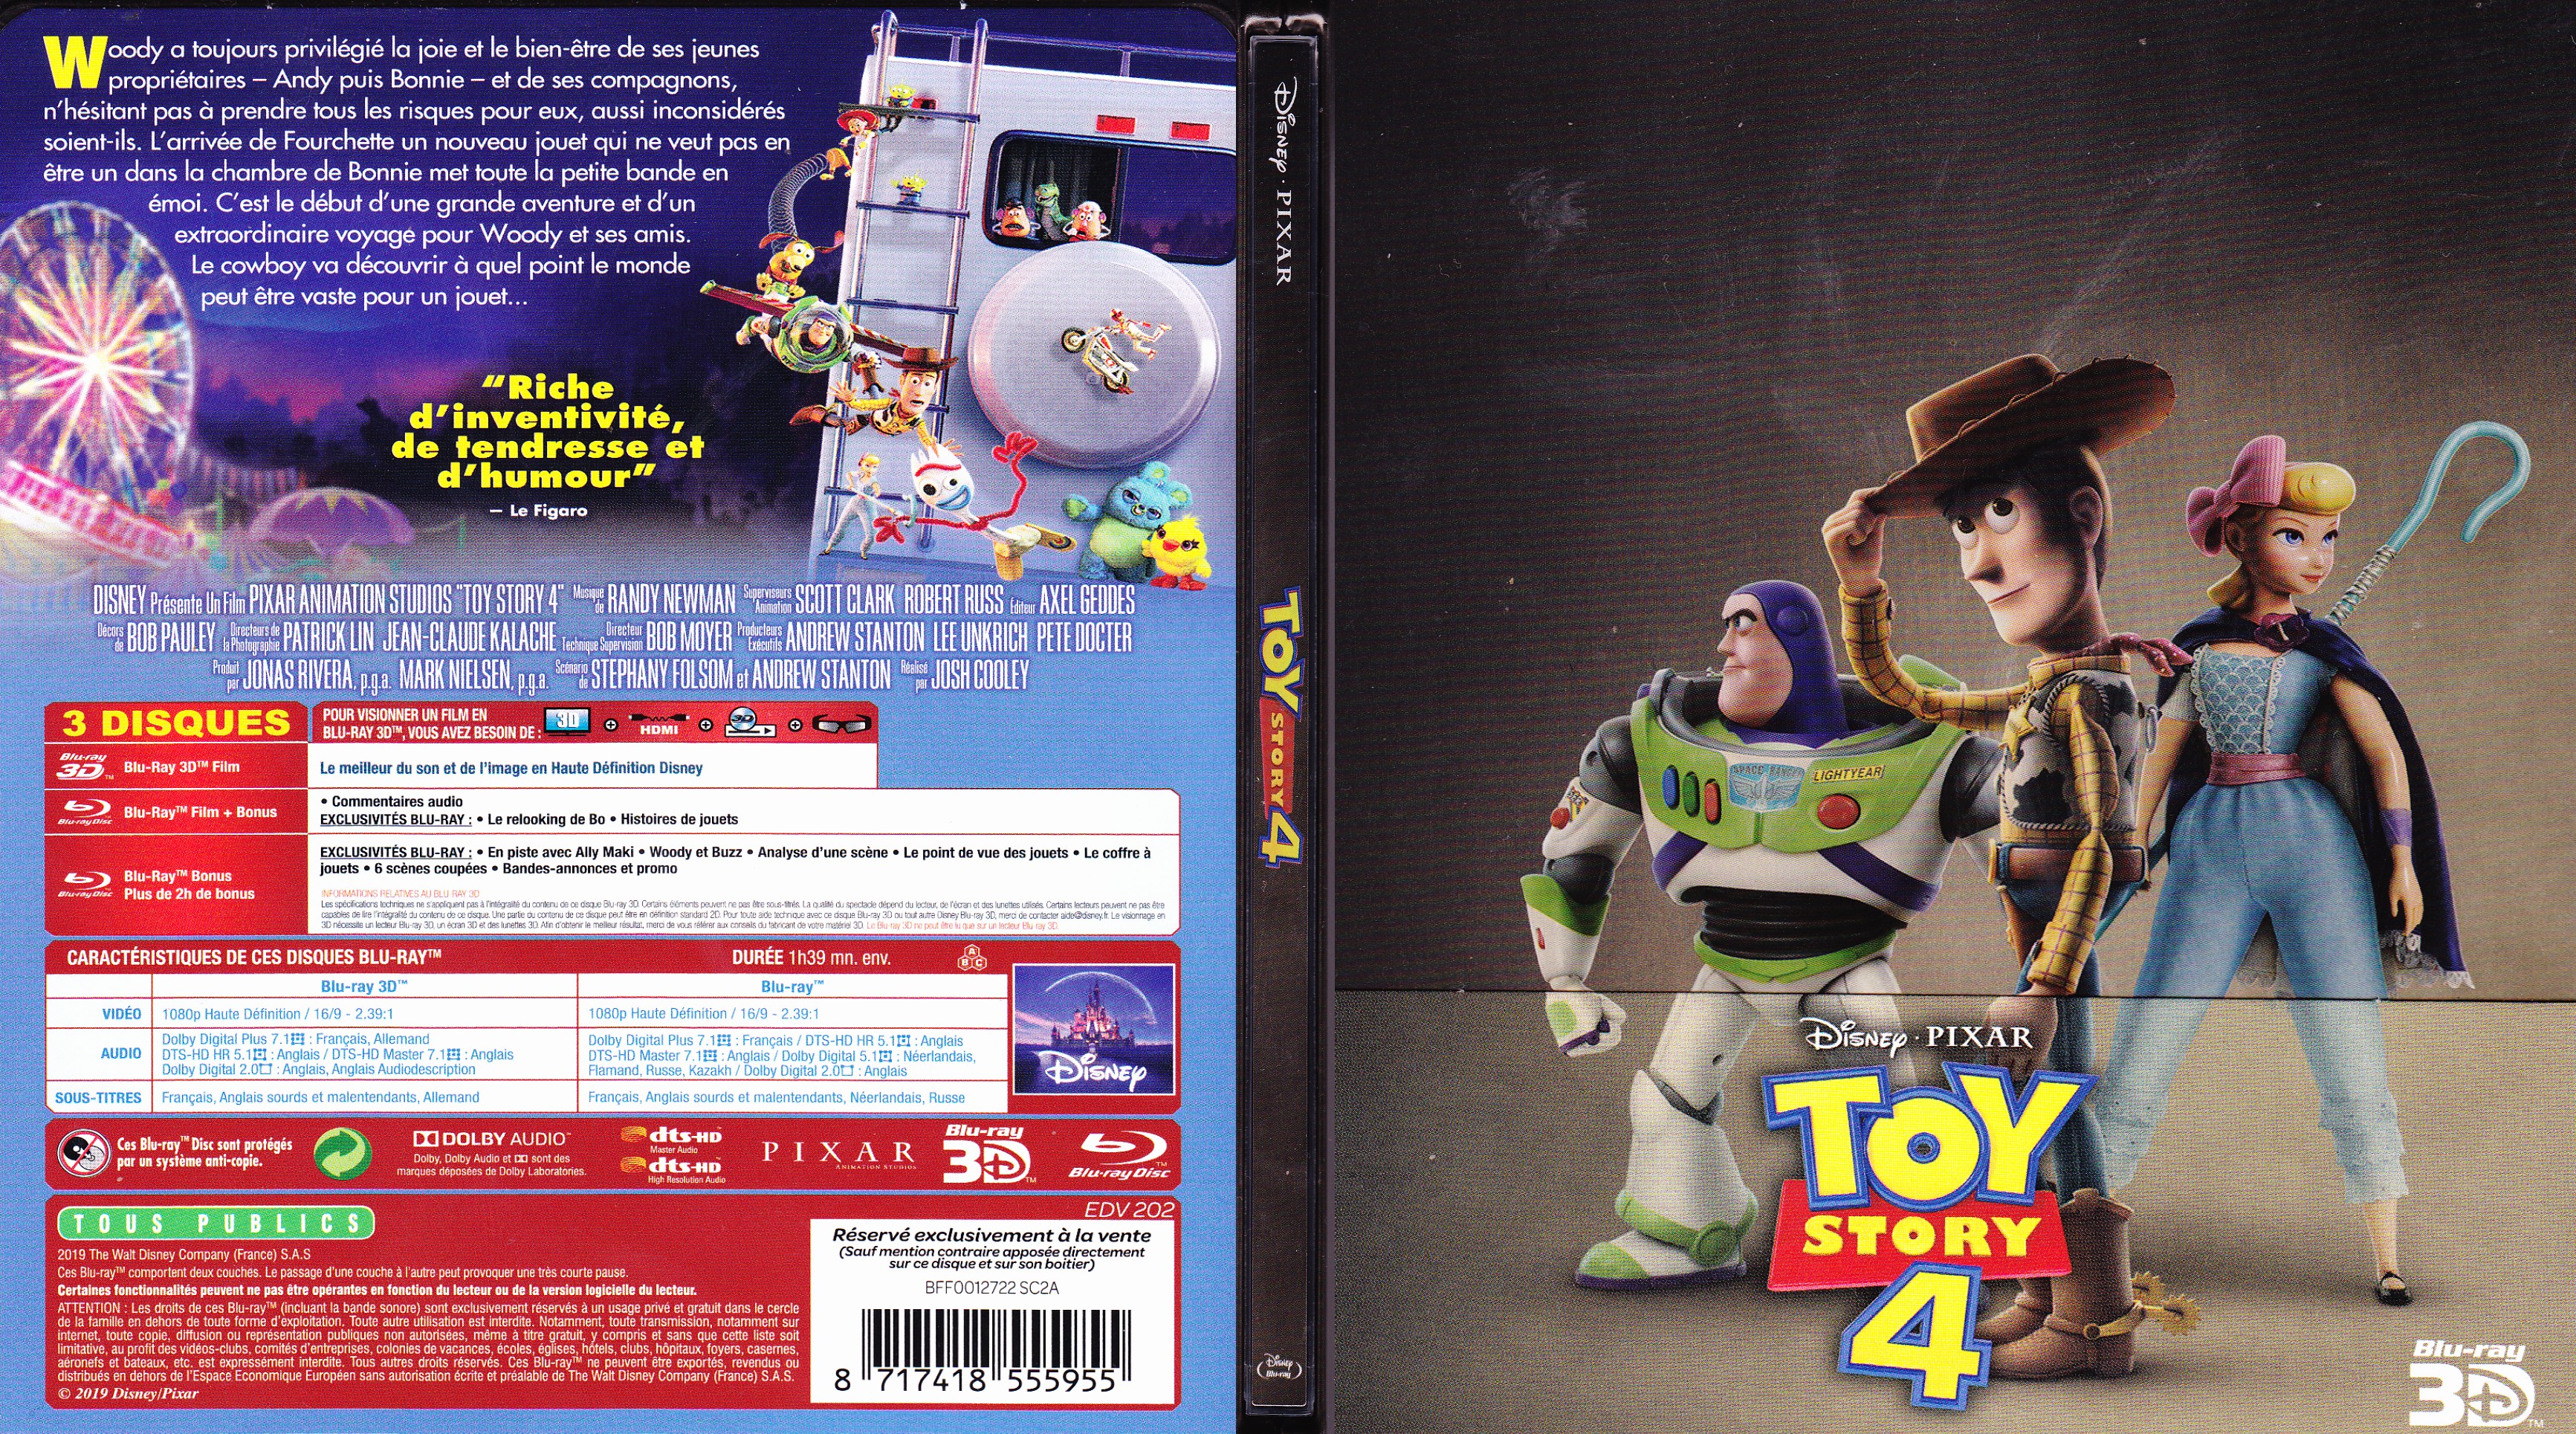 Jaquette DVD Toy story 4 (BLU-RAY)